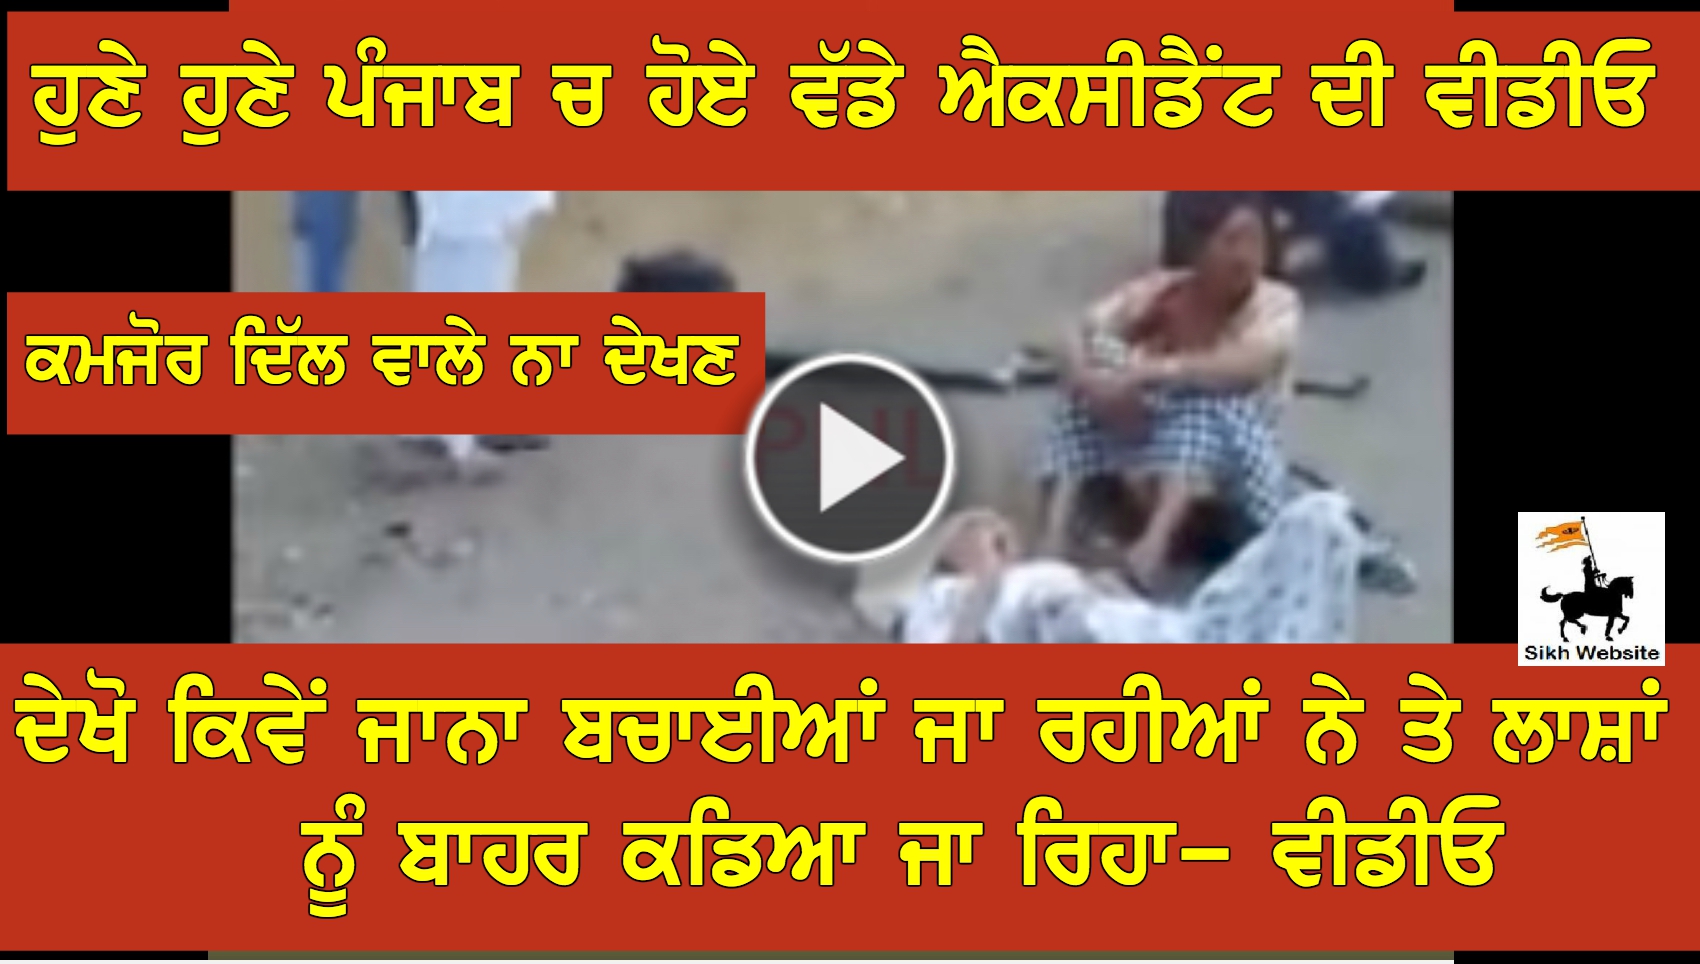 Two major accidents in Punjab .... Live Video